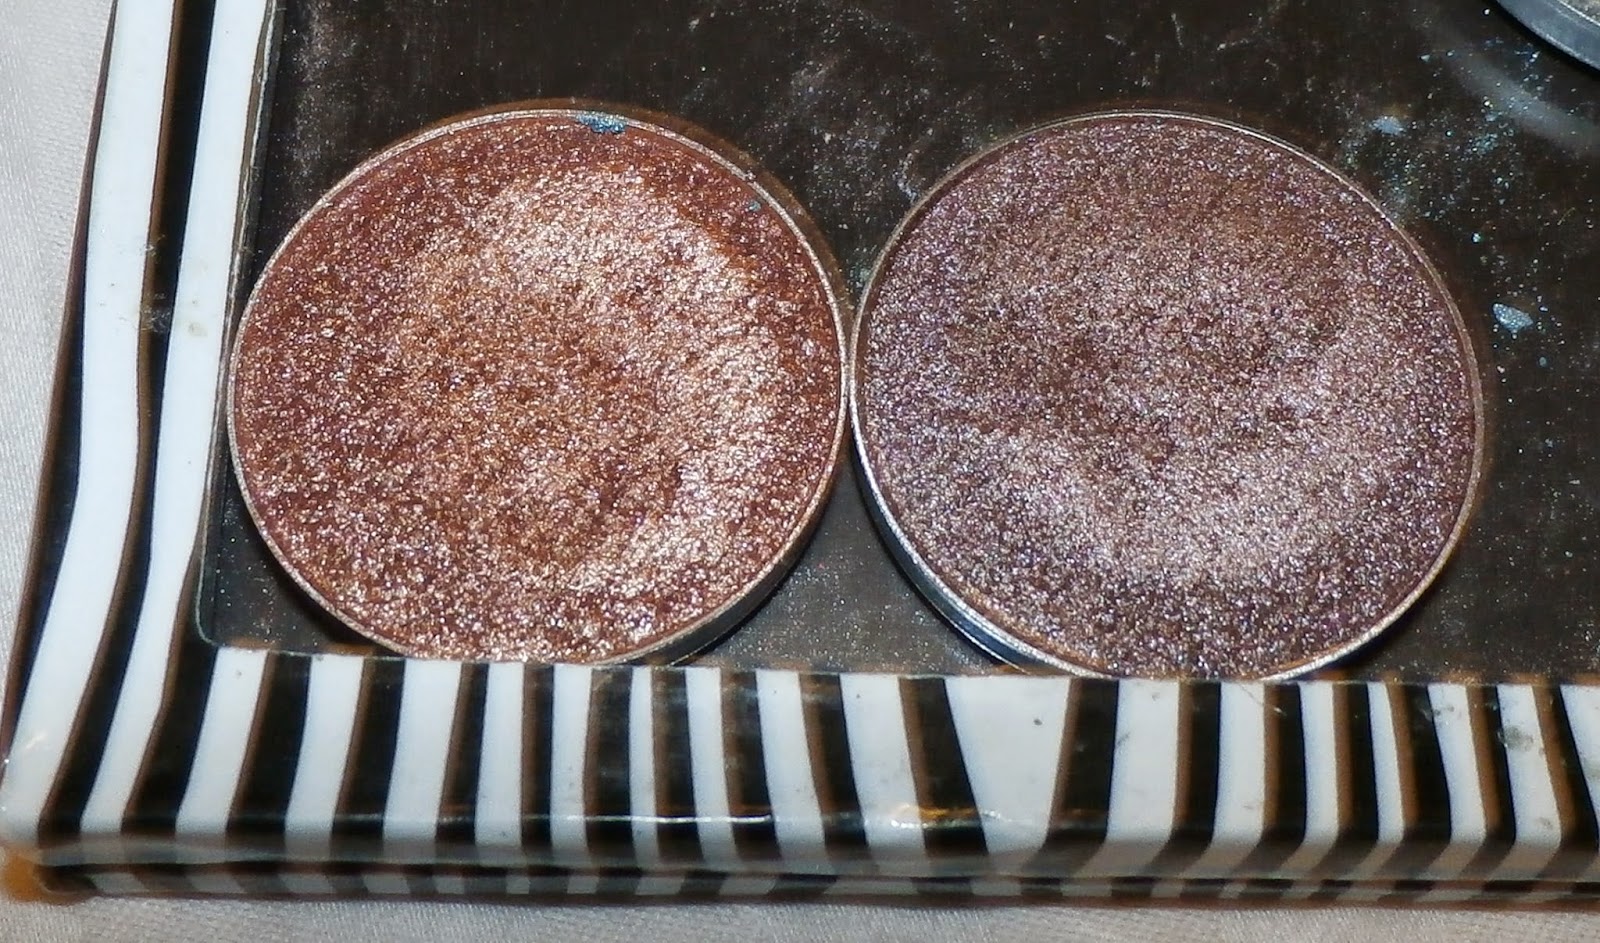 My Makeup Issues: Makeup Geek (MUG) Foiled Eyeshadows in Grandstand and Mesmerized - Review Swatches